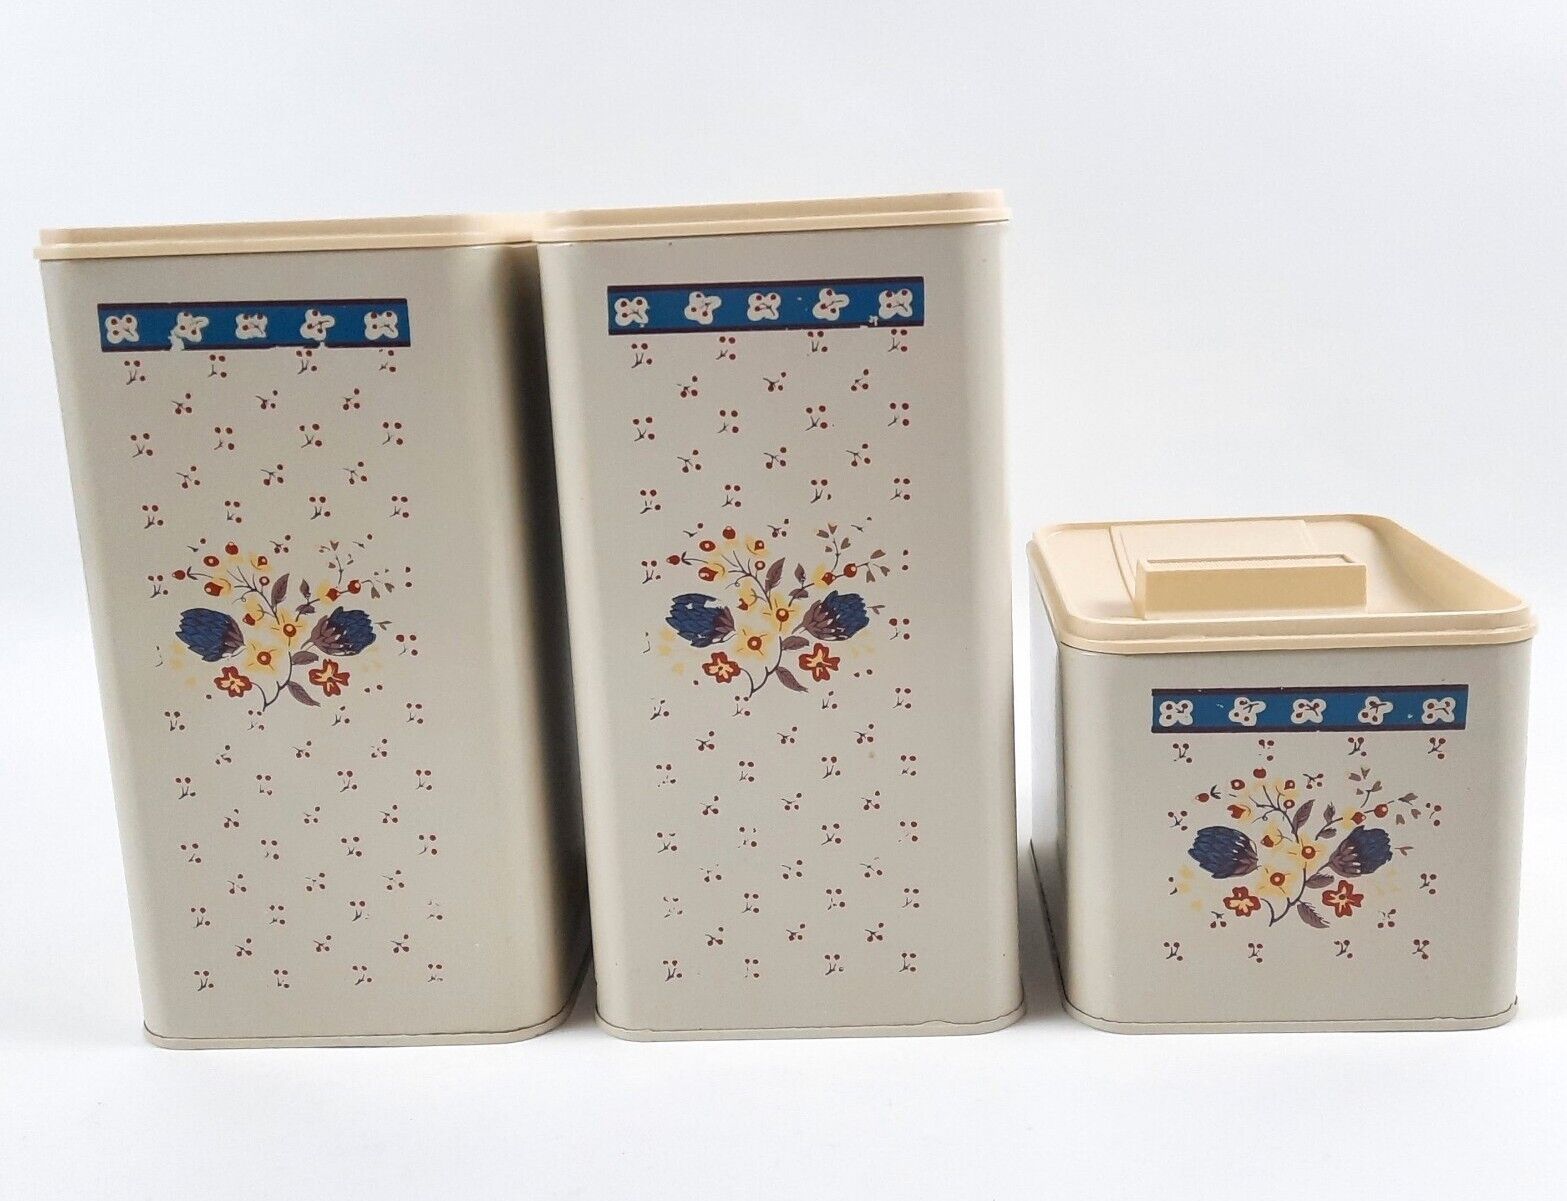 Vintage Ekco Canisters Canada Metal MCM Kitchen Tin Storage Container Set of 3